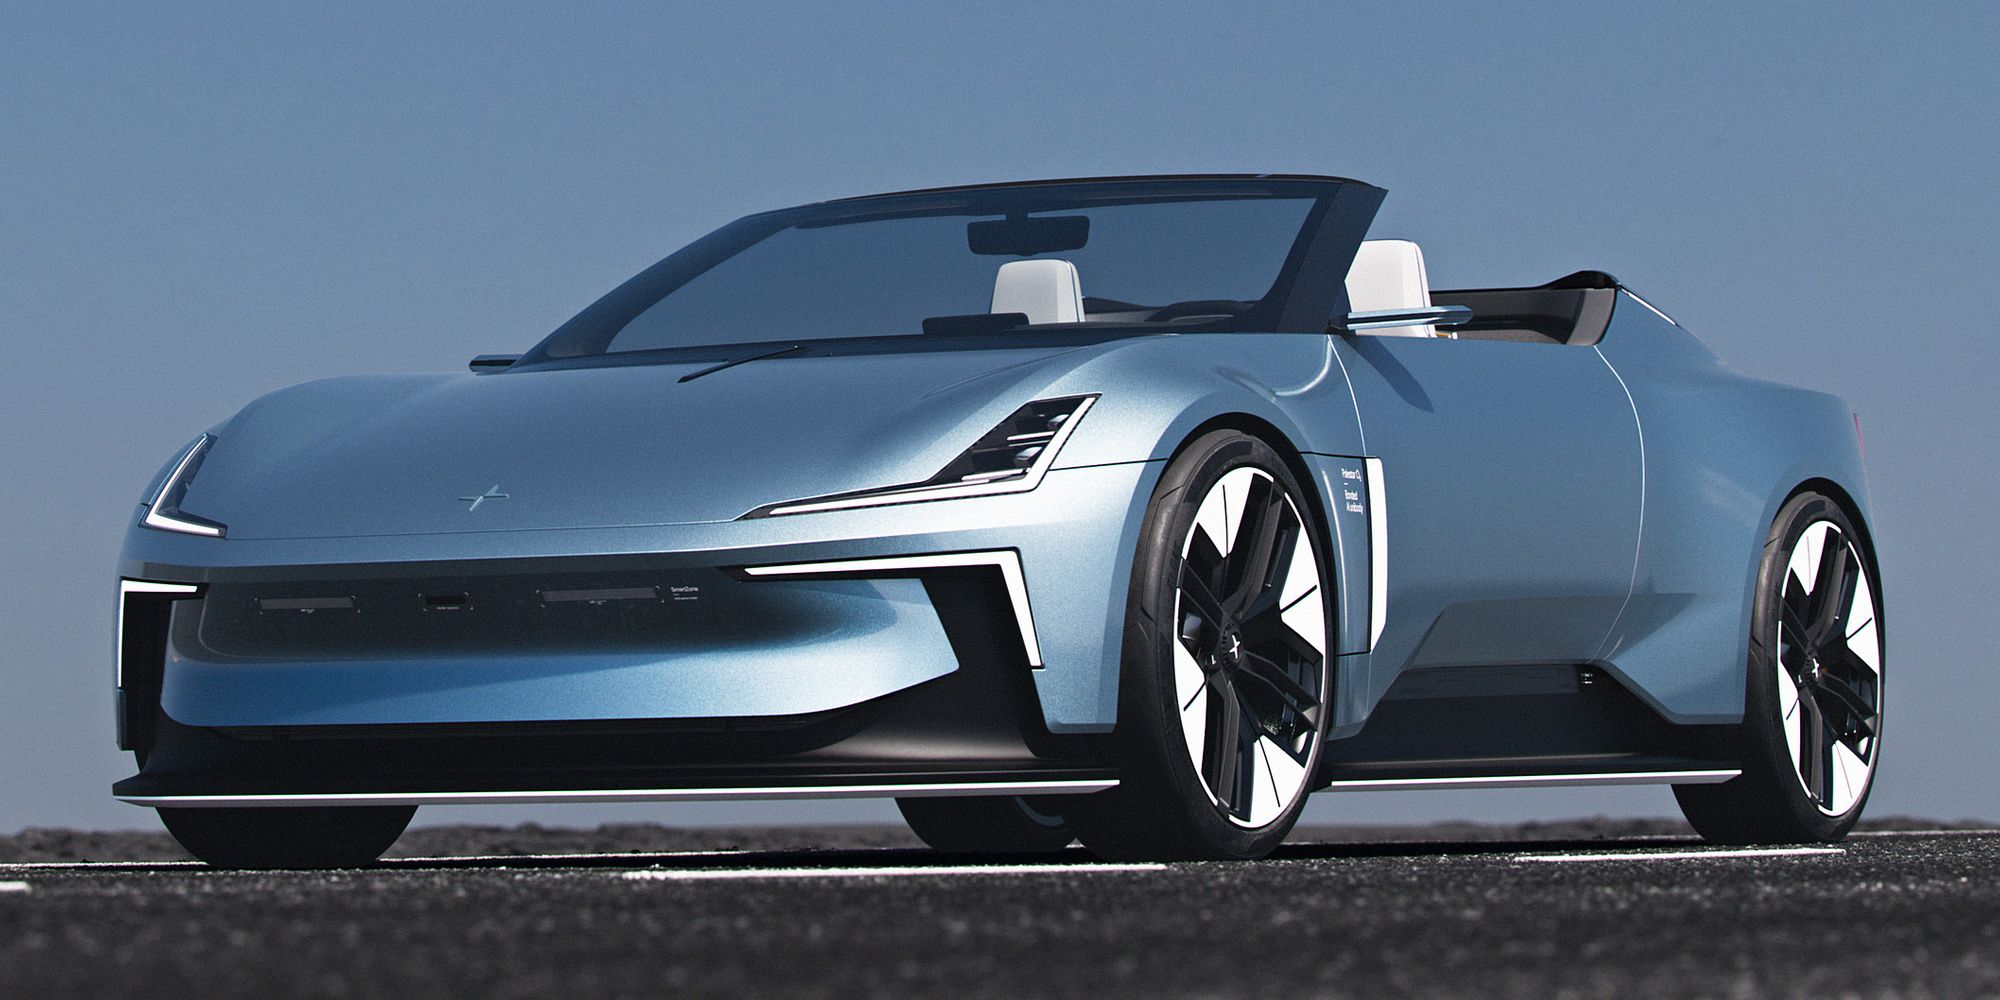 The front of the Polestar O2 Concept, roof down